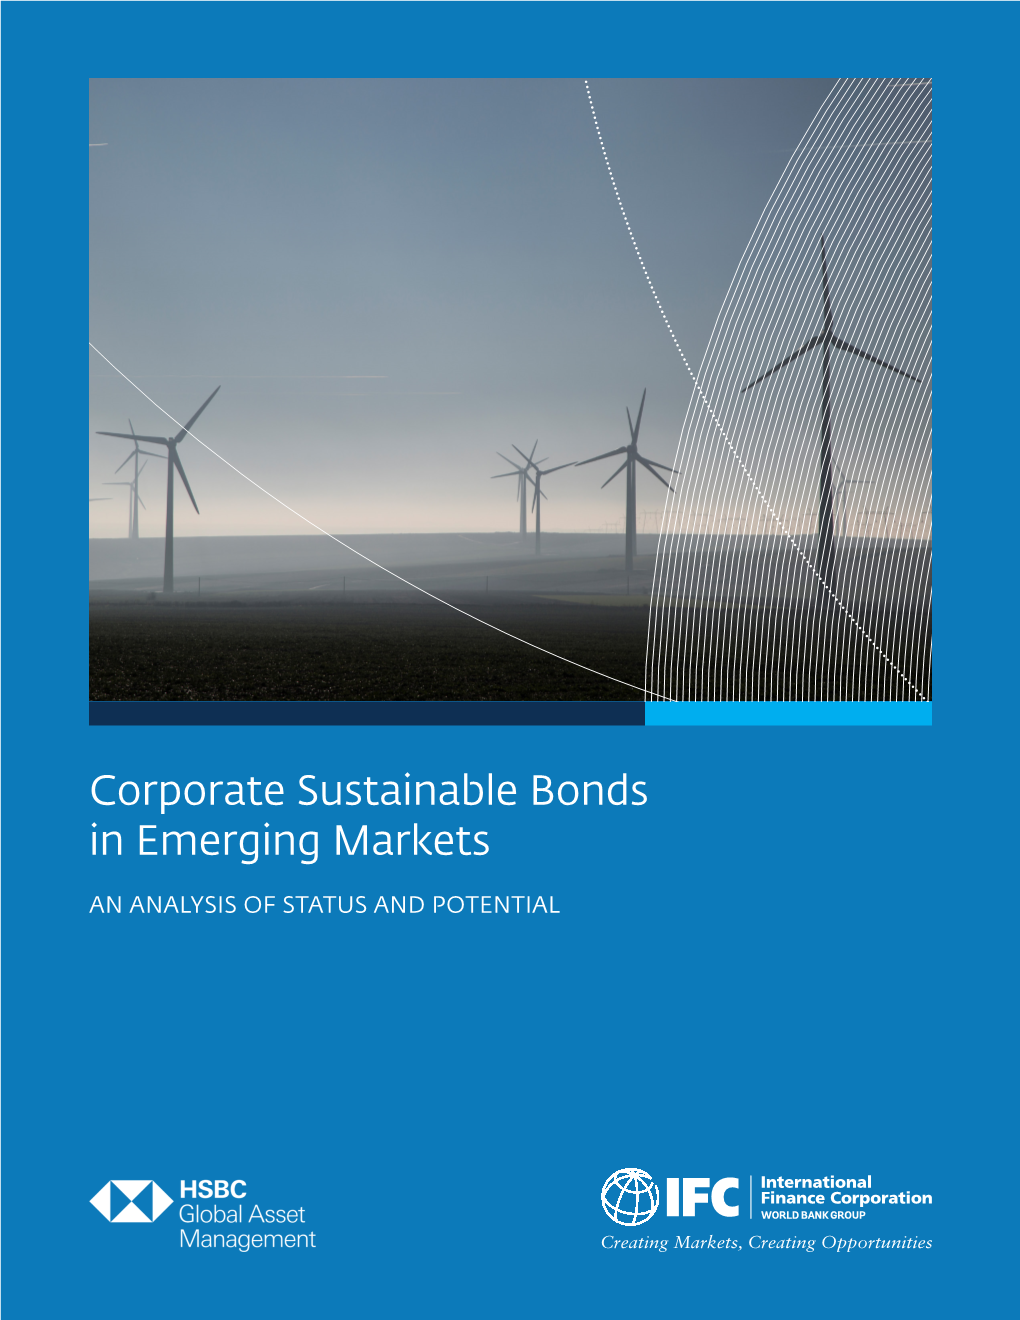 Corporate Sustainable Bonds in Emerging Markets